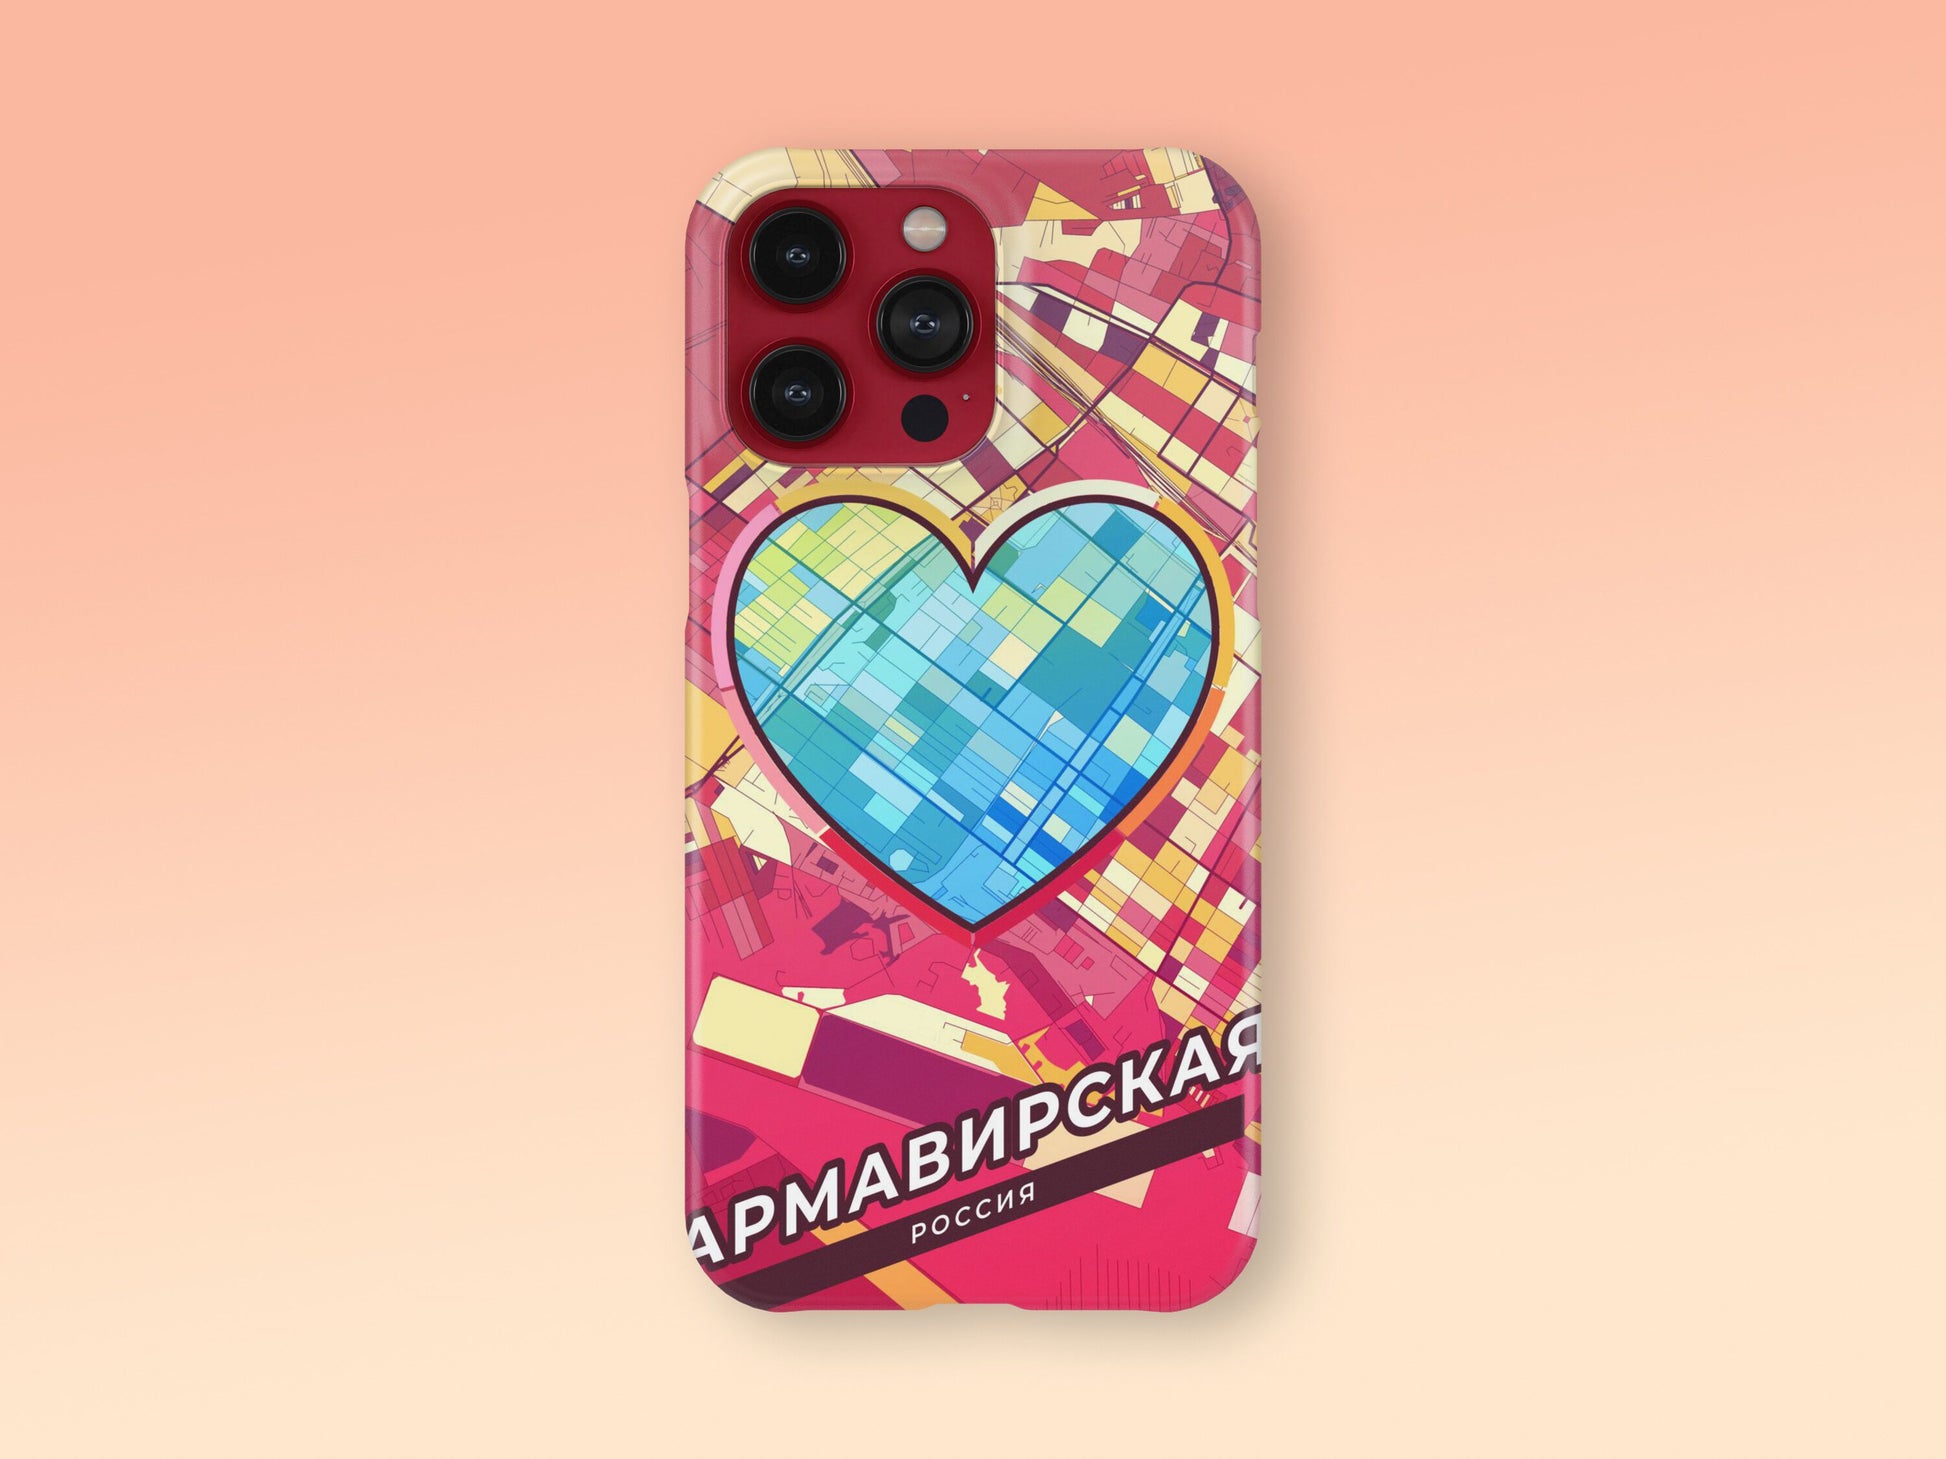 Armavir Russia slim phone case with colorful icon. Birthday, wedding or housewarming gift. Couple match cases. 2